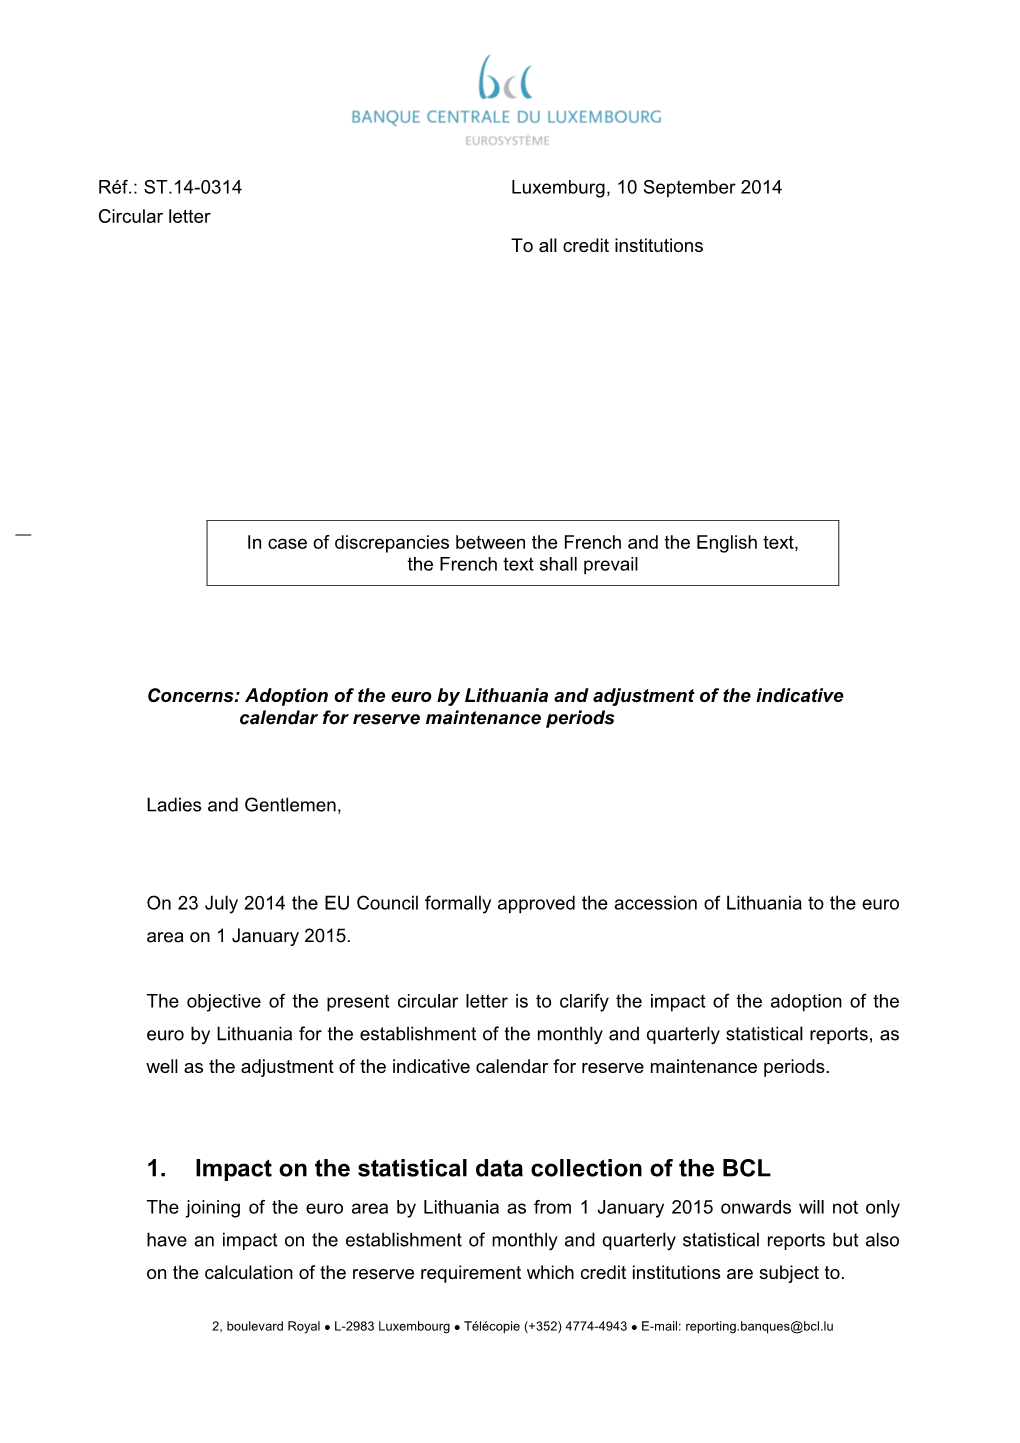 1. Impact on the Statistical Data Collection of The